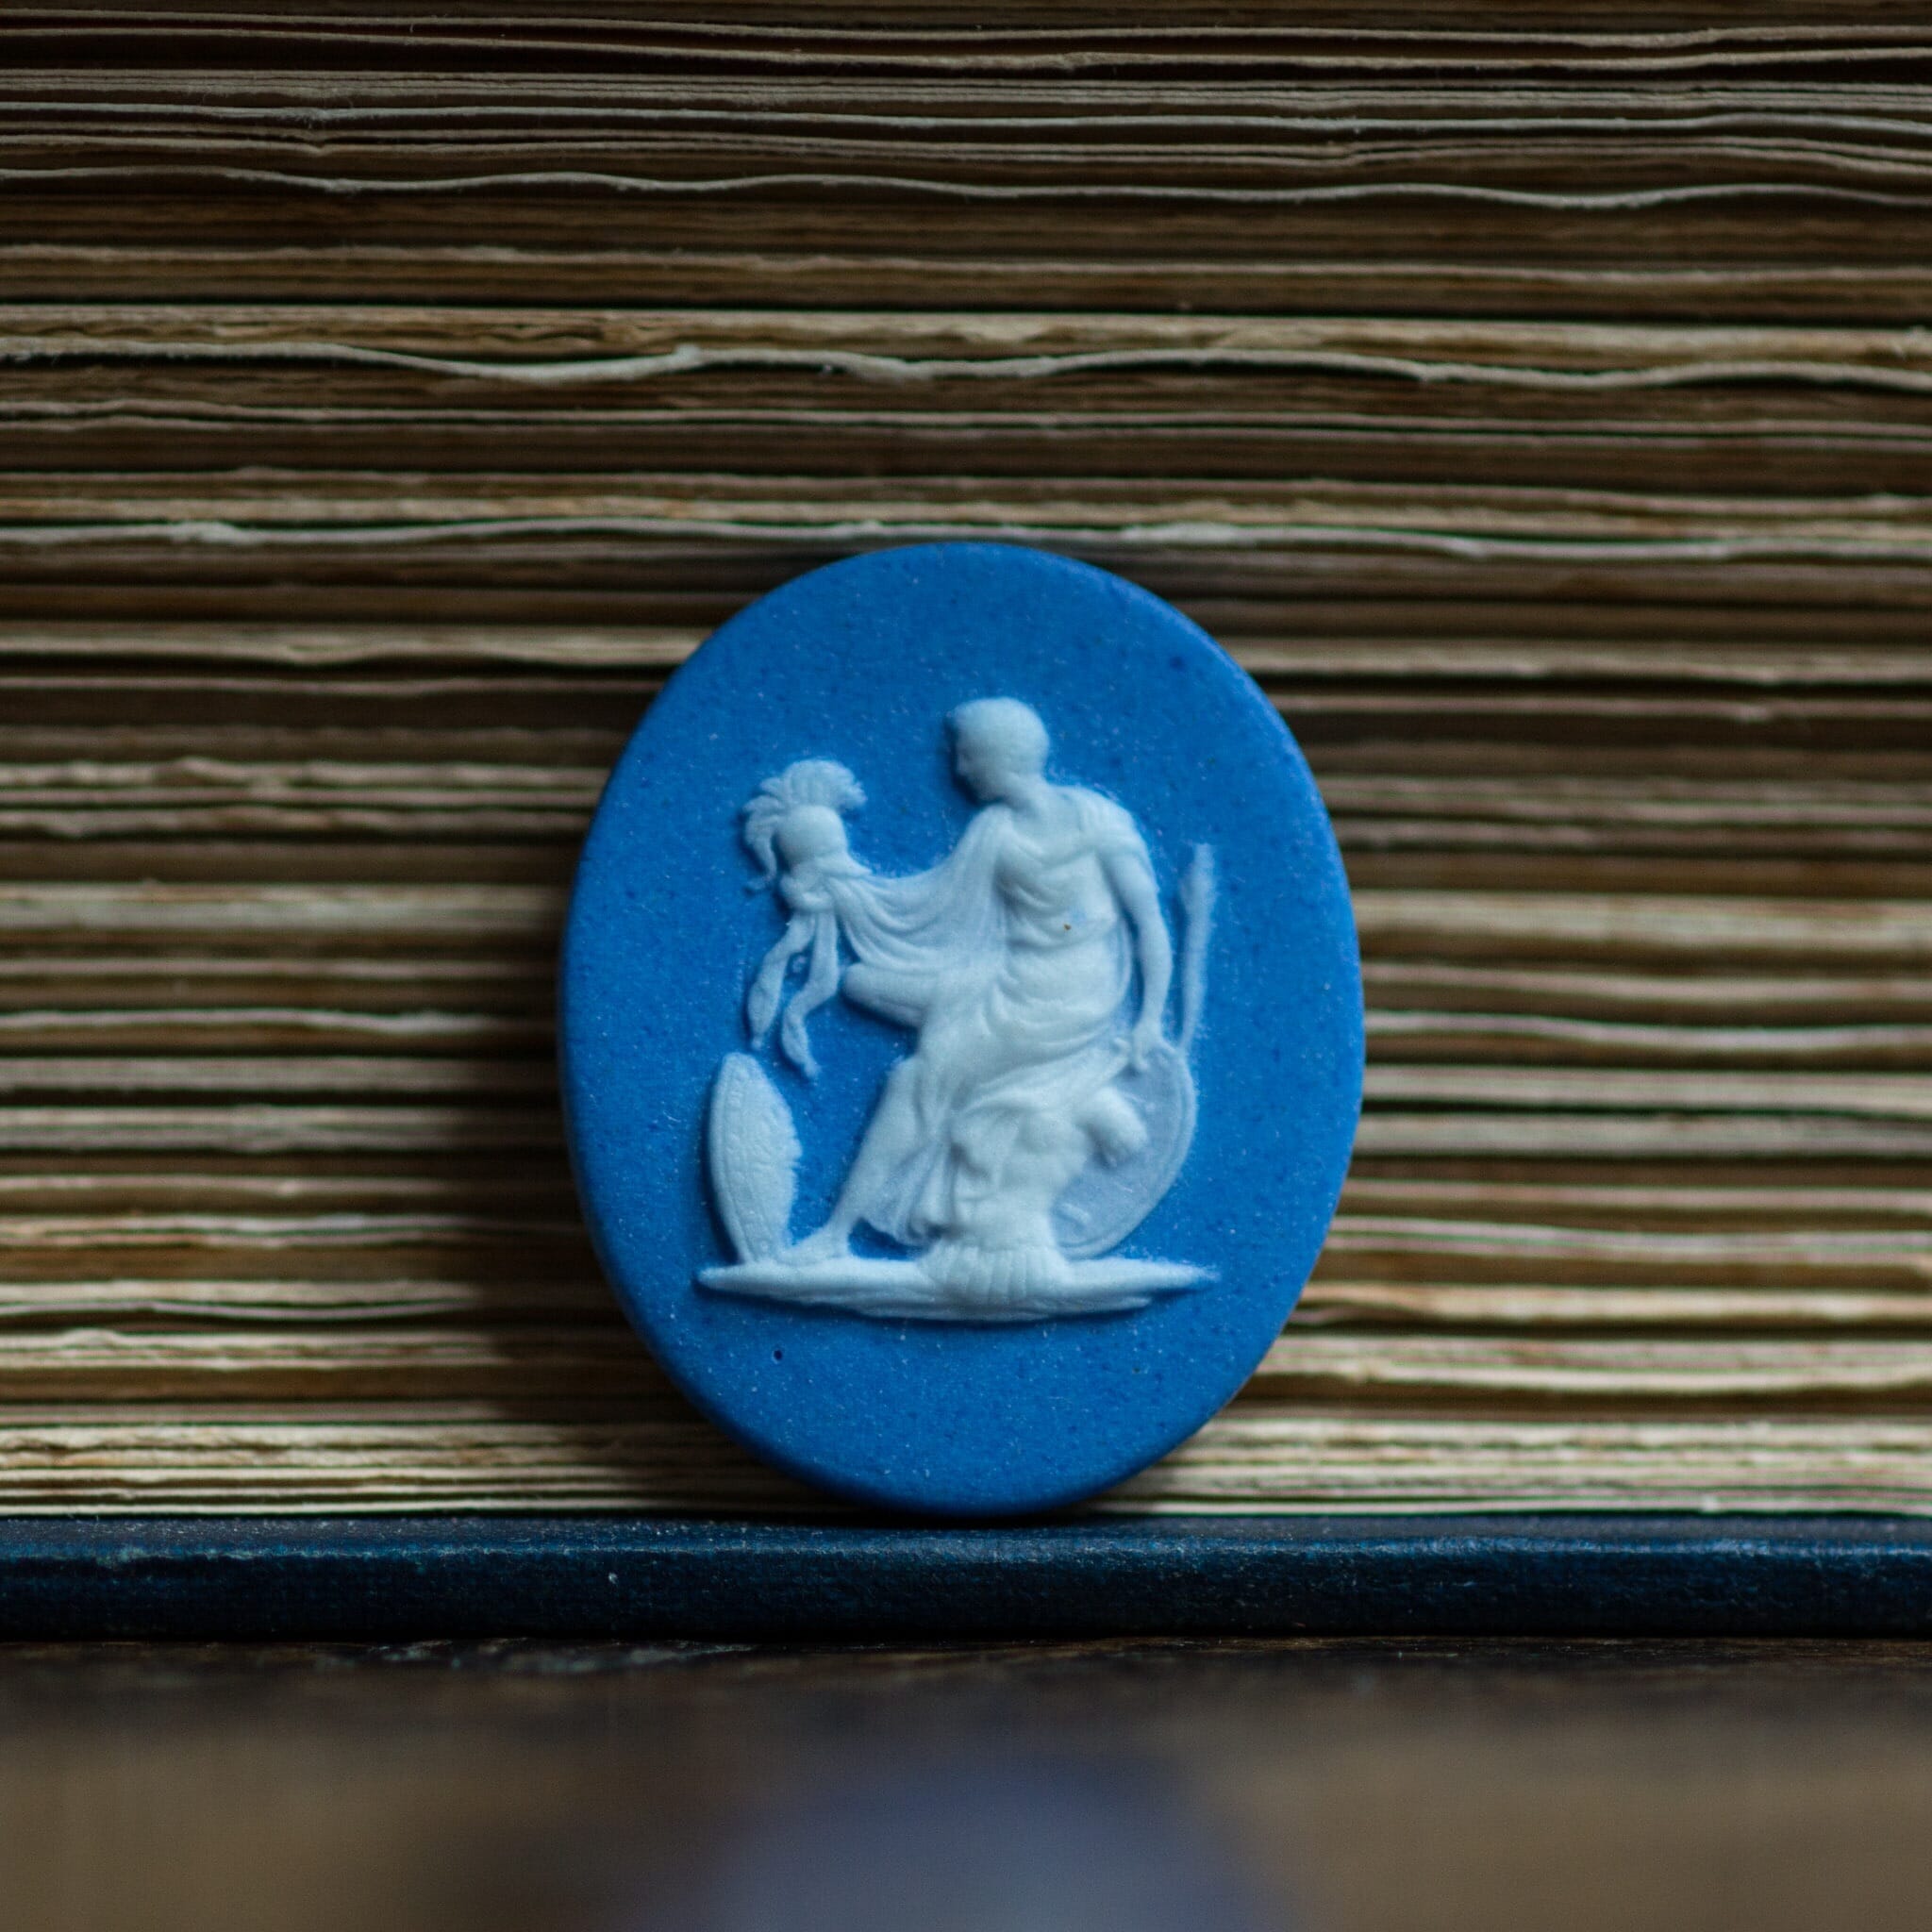 Wedgwood style jasper plaque , classical figure, early 19th century-0